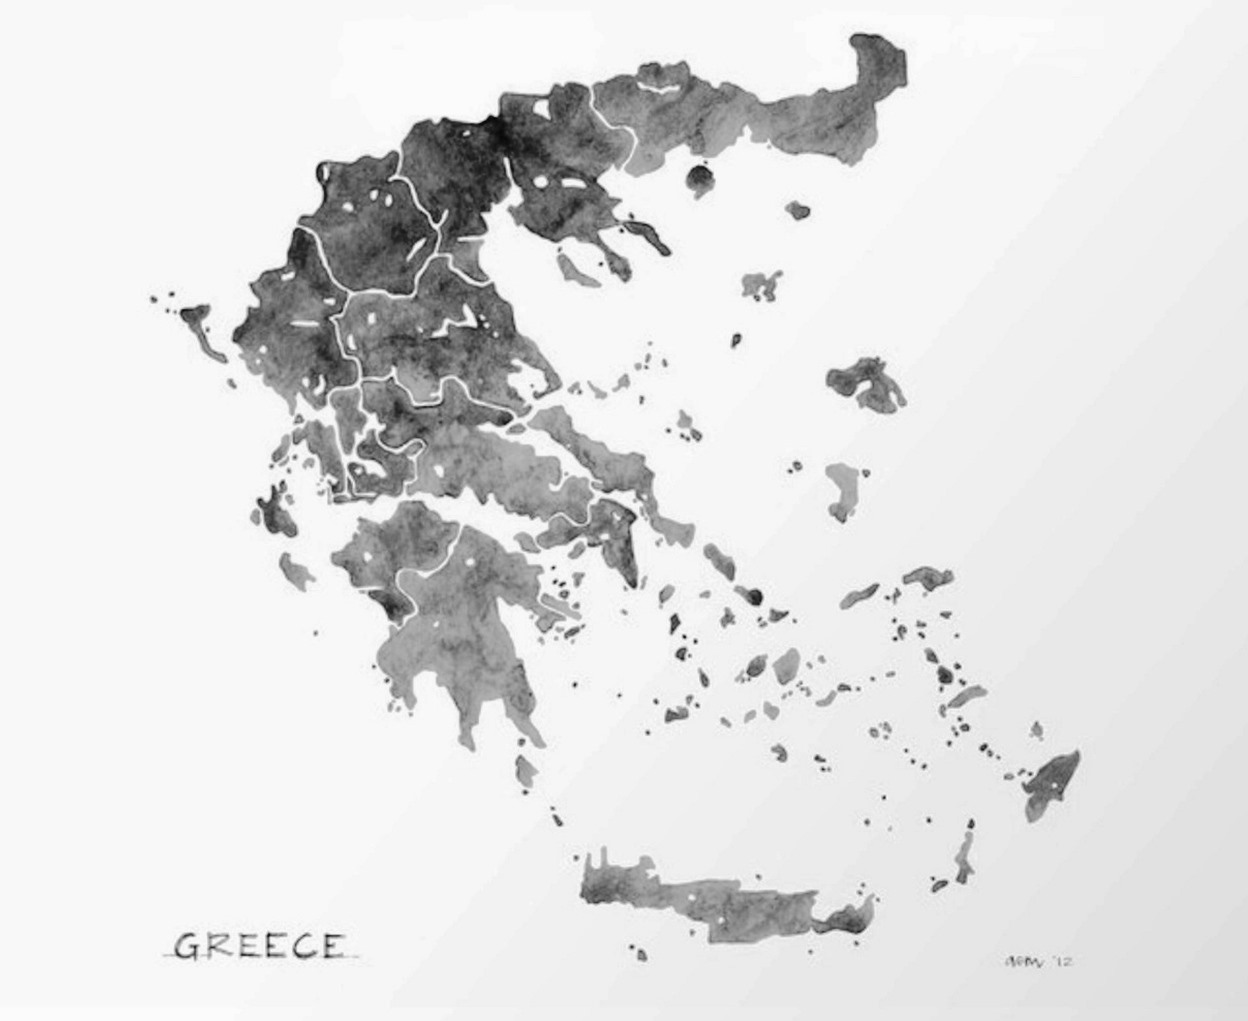 Greece, the southernmost edge of Europe